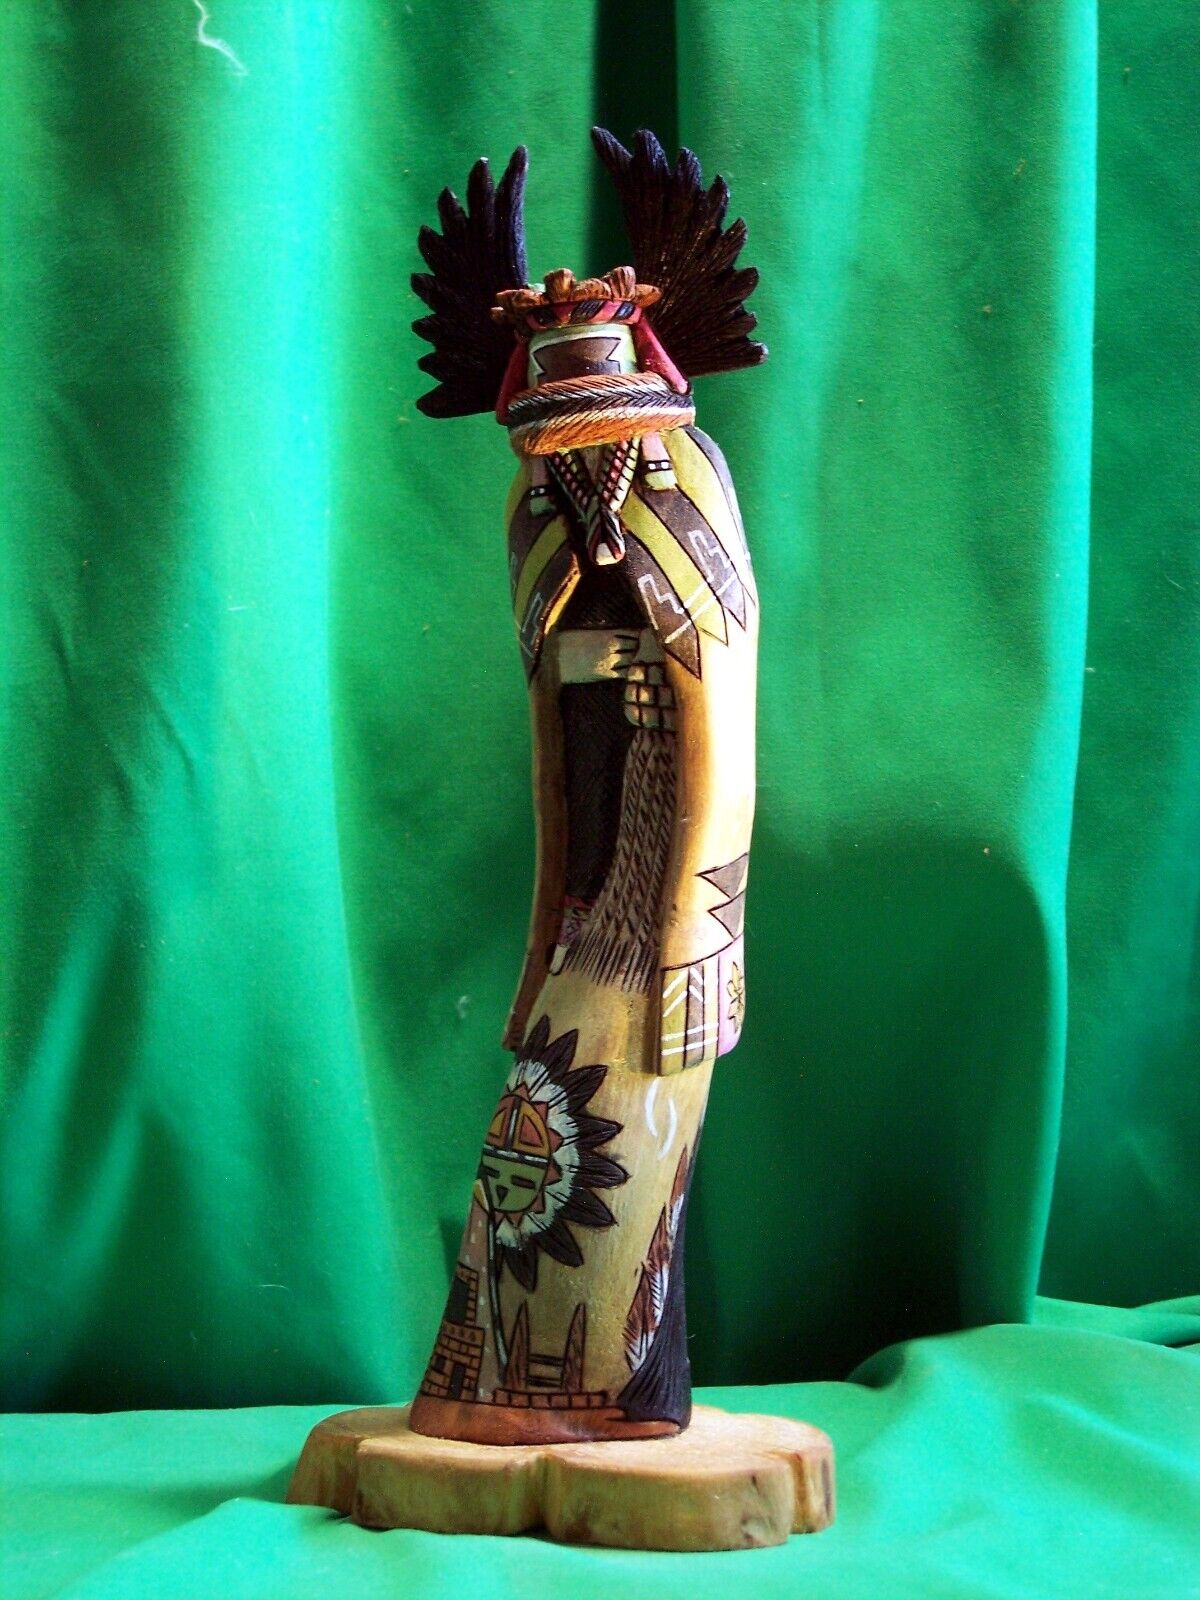 Hopi Kachina Doll - The Crow Mother Kachina by Wally Grover - Gorgeous